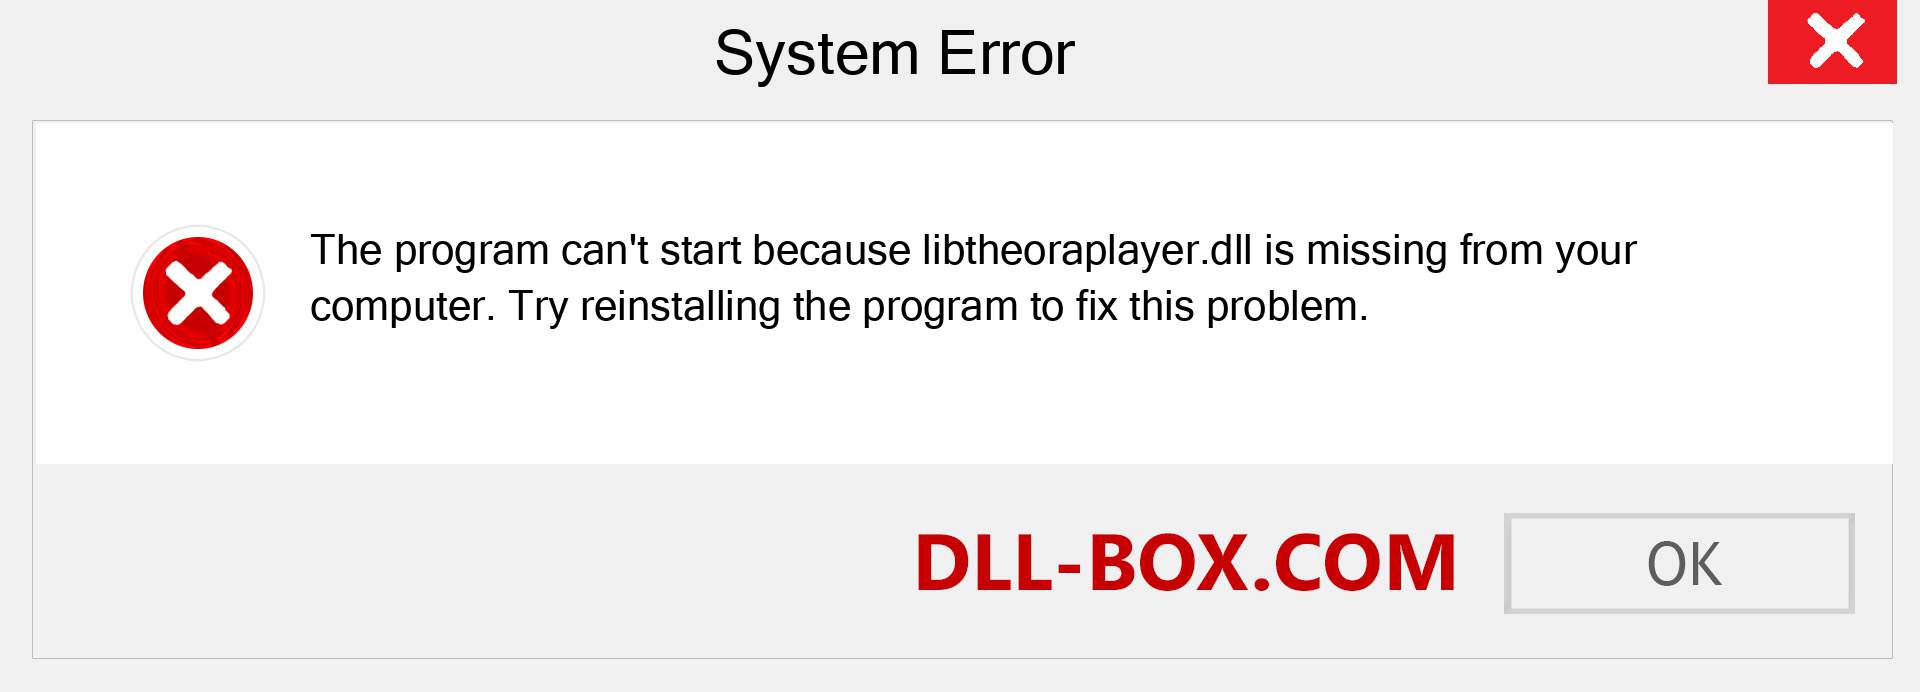  libtheoraplayer.dll file is missing?. Download for Windows 7, 8, 10 - Fix  libtheoraplayer dll Missing Error on Windows, photos, images